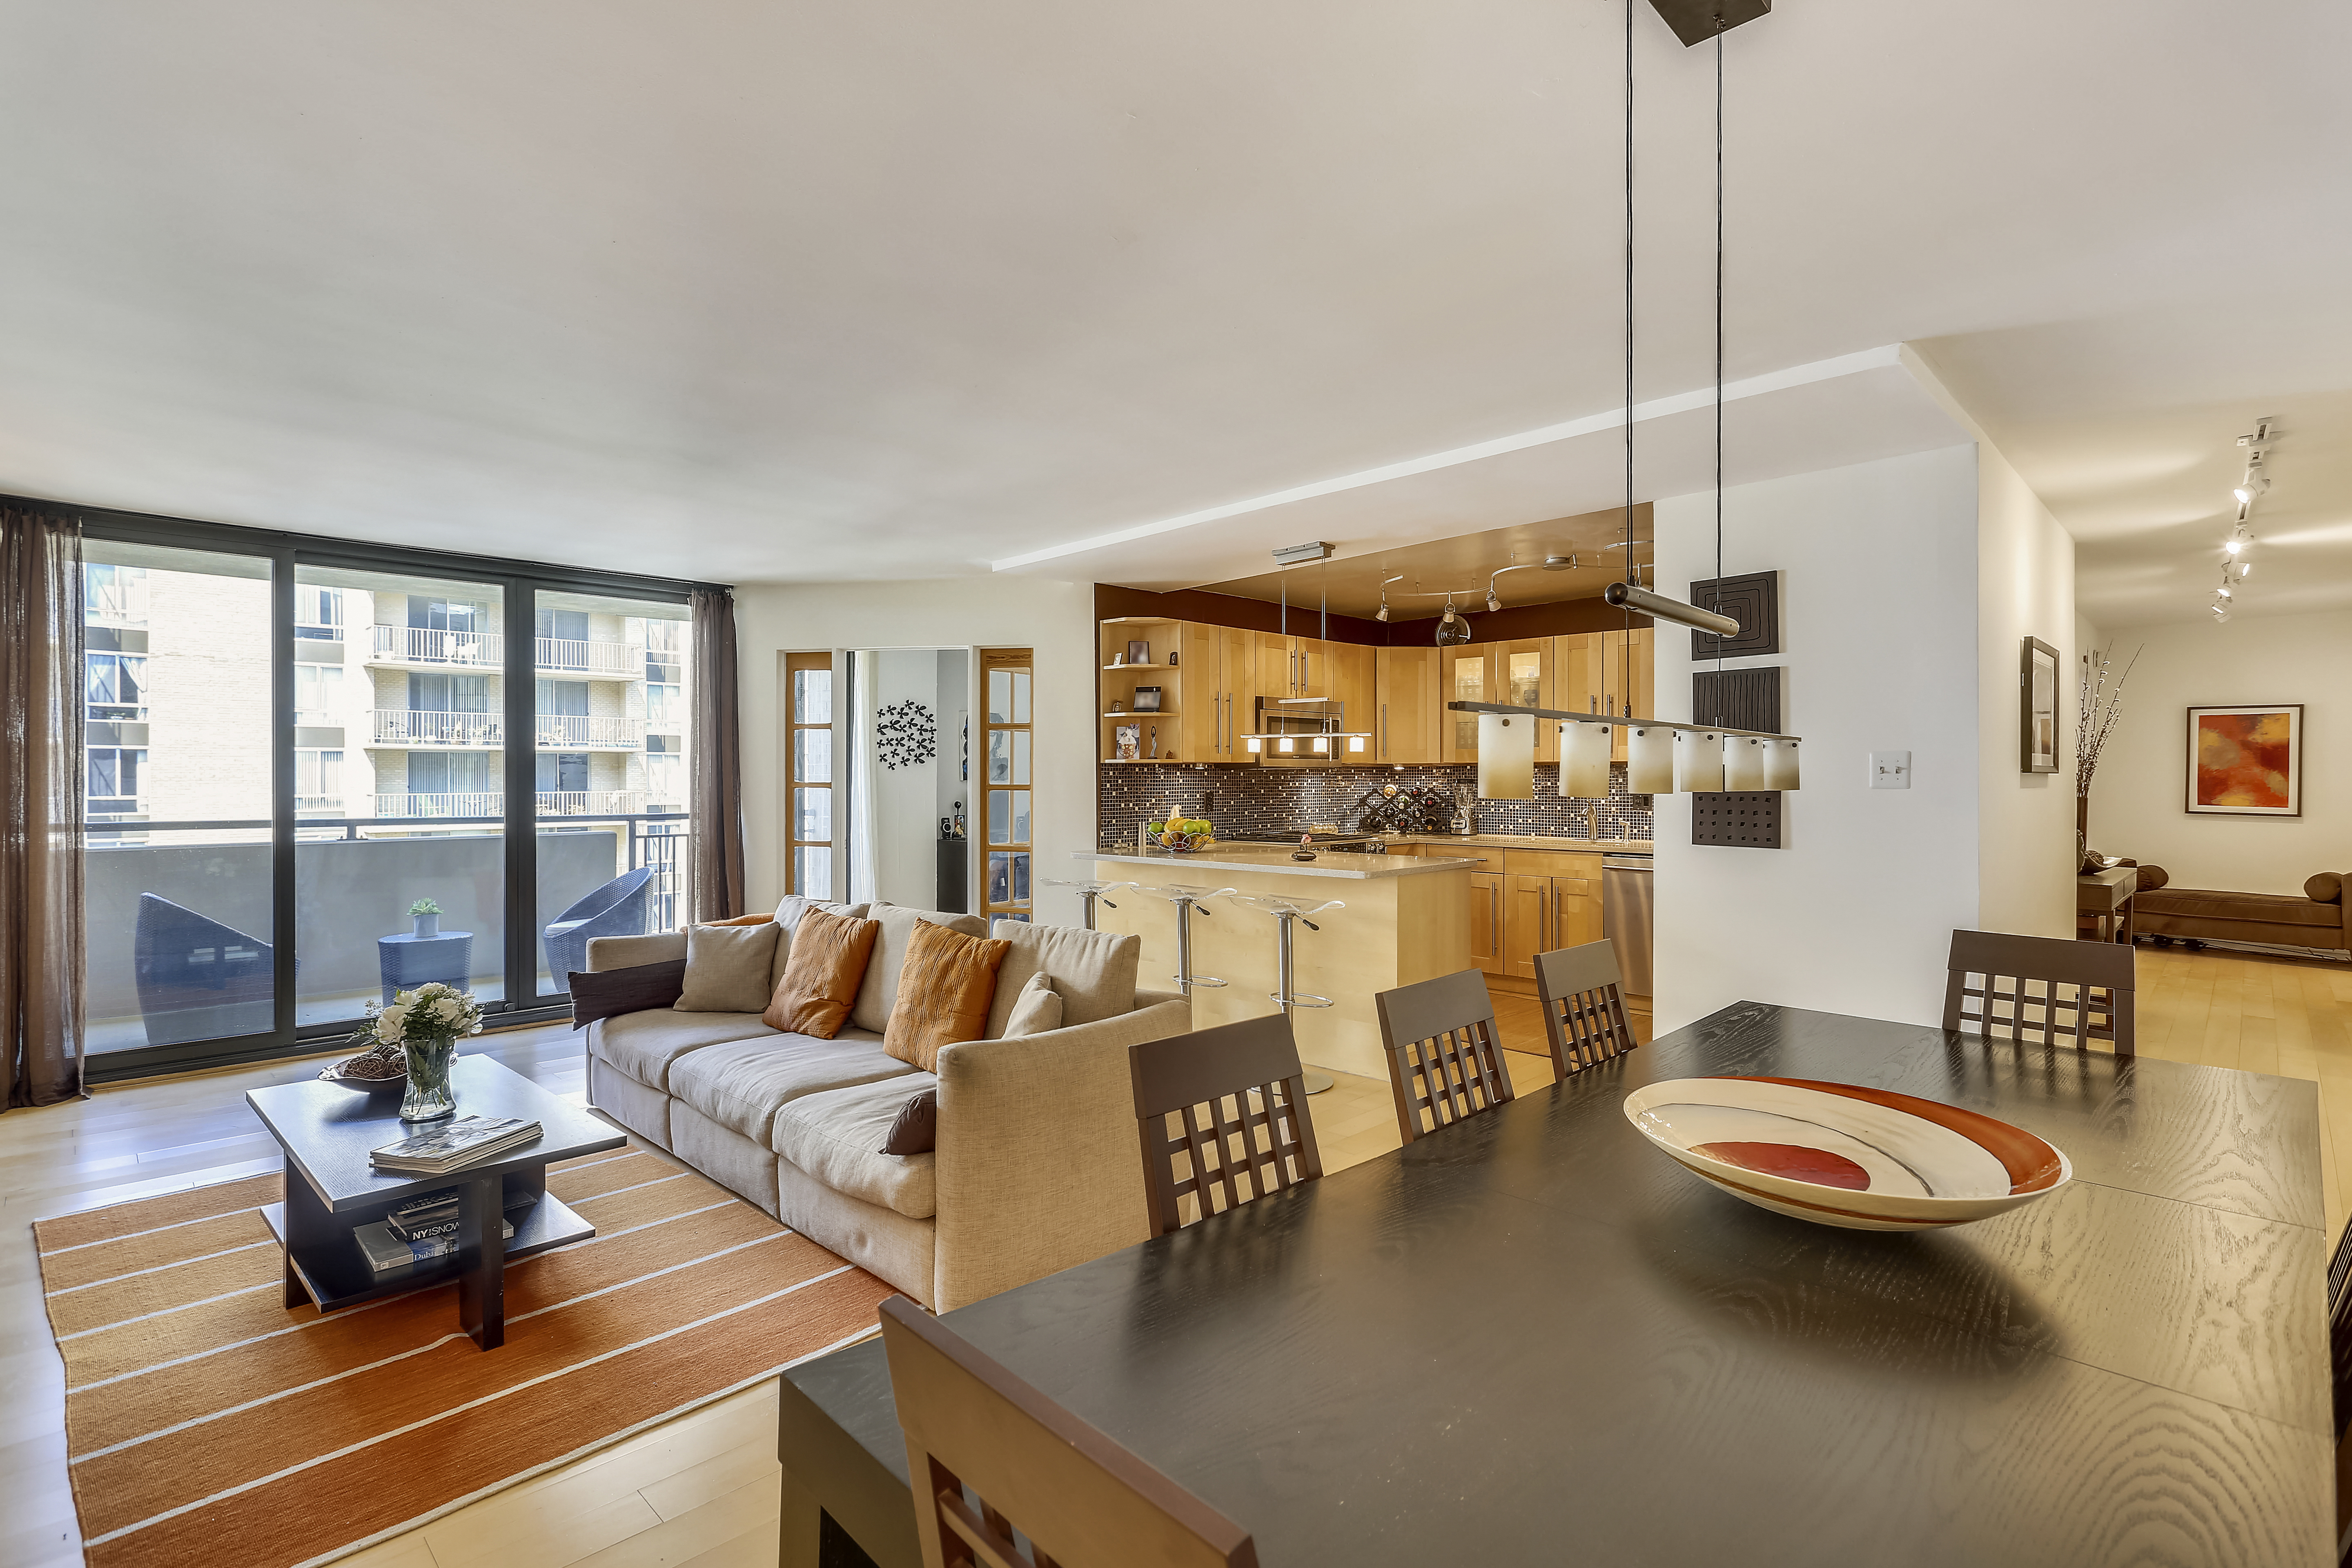 Chevy Chase Featured Listing: 4620 N Park Ave #1409E